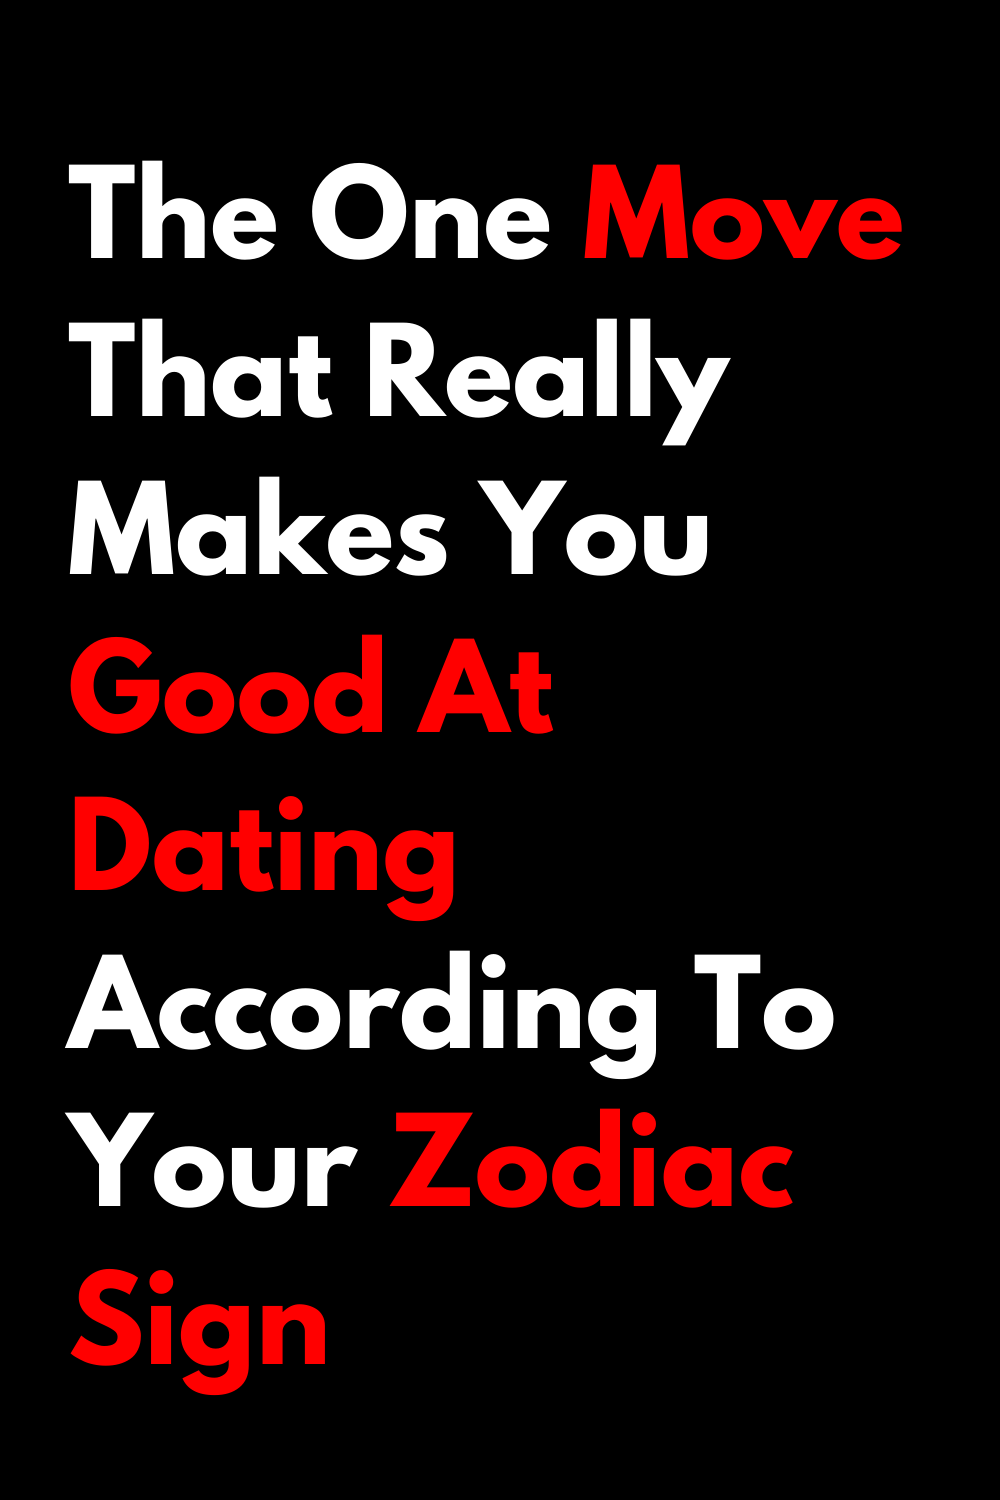 The One Move That Really Makes You Good At Dating According To Your Zodiac Sign